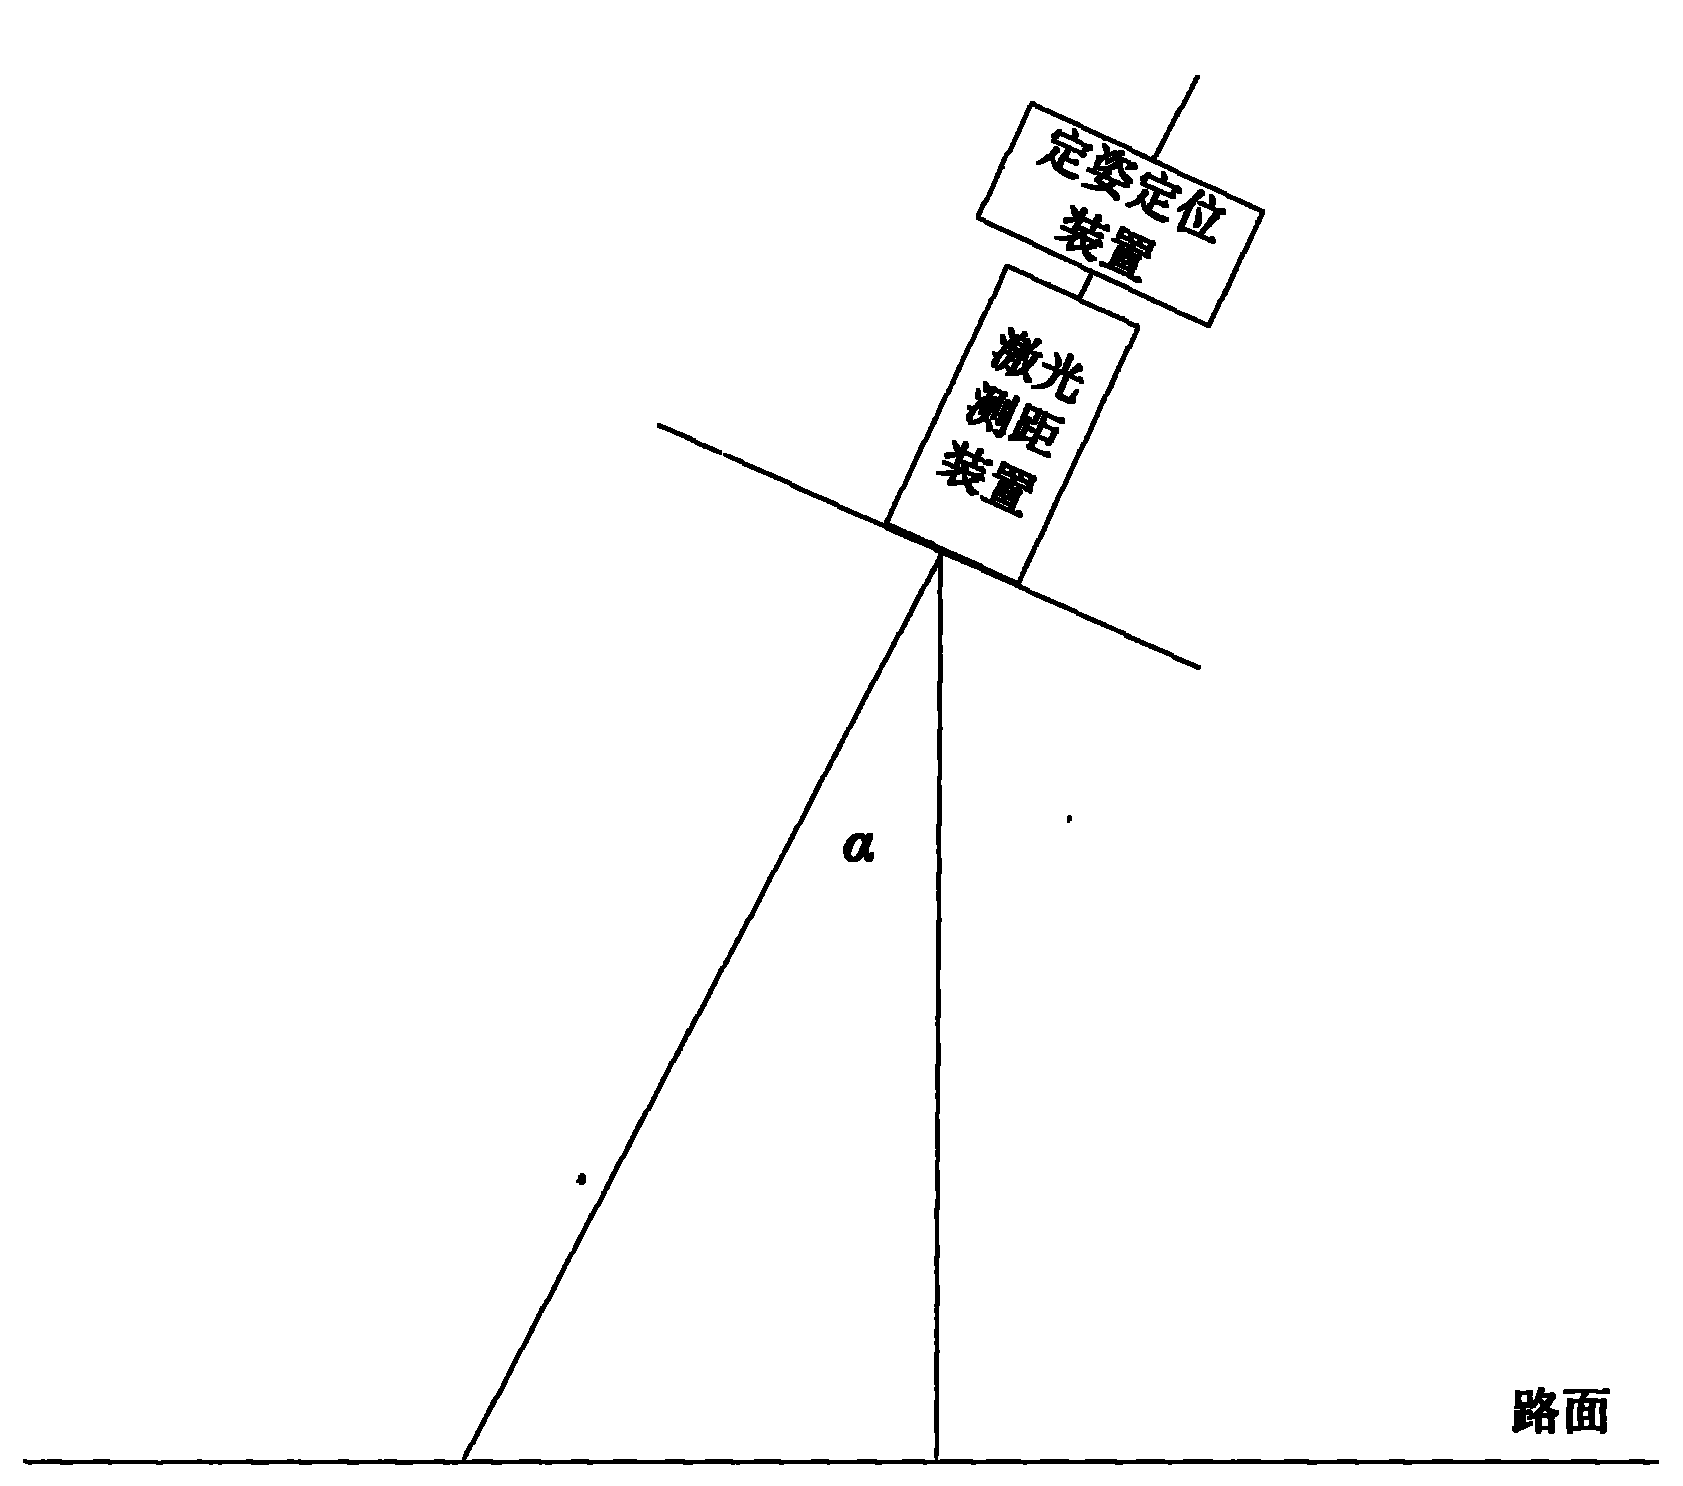 Detection method of road-surface evenness